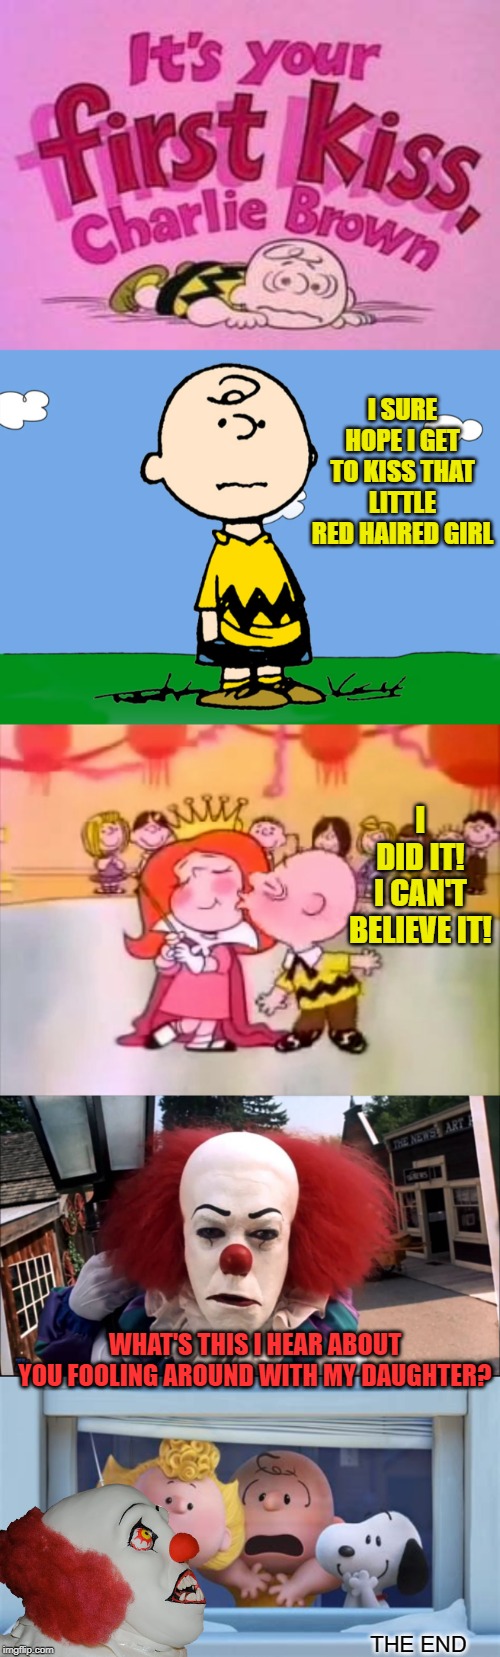 First and Last Kiss | I SURE HOPE I GET TO KISS THAT LITTLE RED HAIRED GIRL; I DID IT! I CAN'T BELIEVE IT! WHAT'S THIS I HEAR ABOUT YOU FOOLING AROUND WITH MY DAUGHTER? THE END | image tagged in funny memes,memes,charlie brown,pennywise,scary clown,red | made w/ Imgflip meme maker